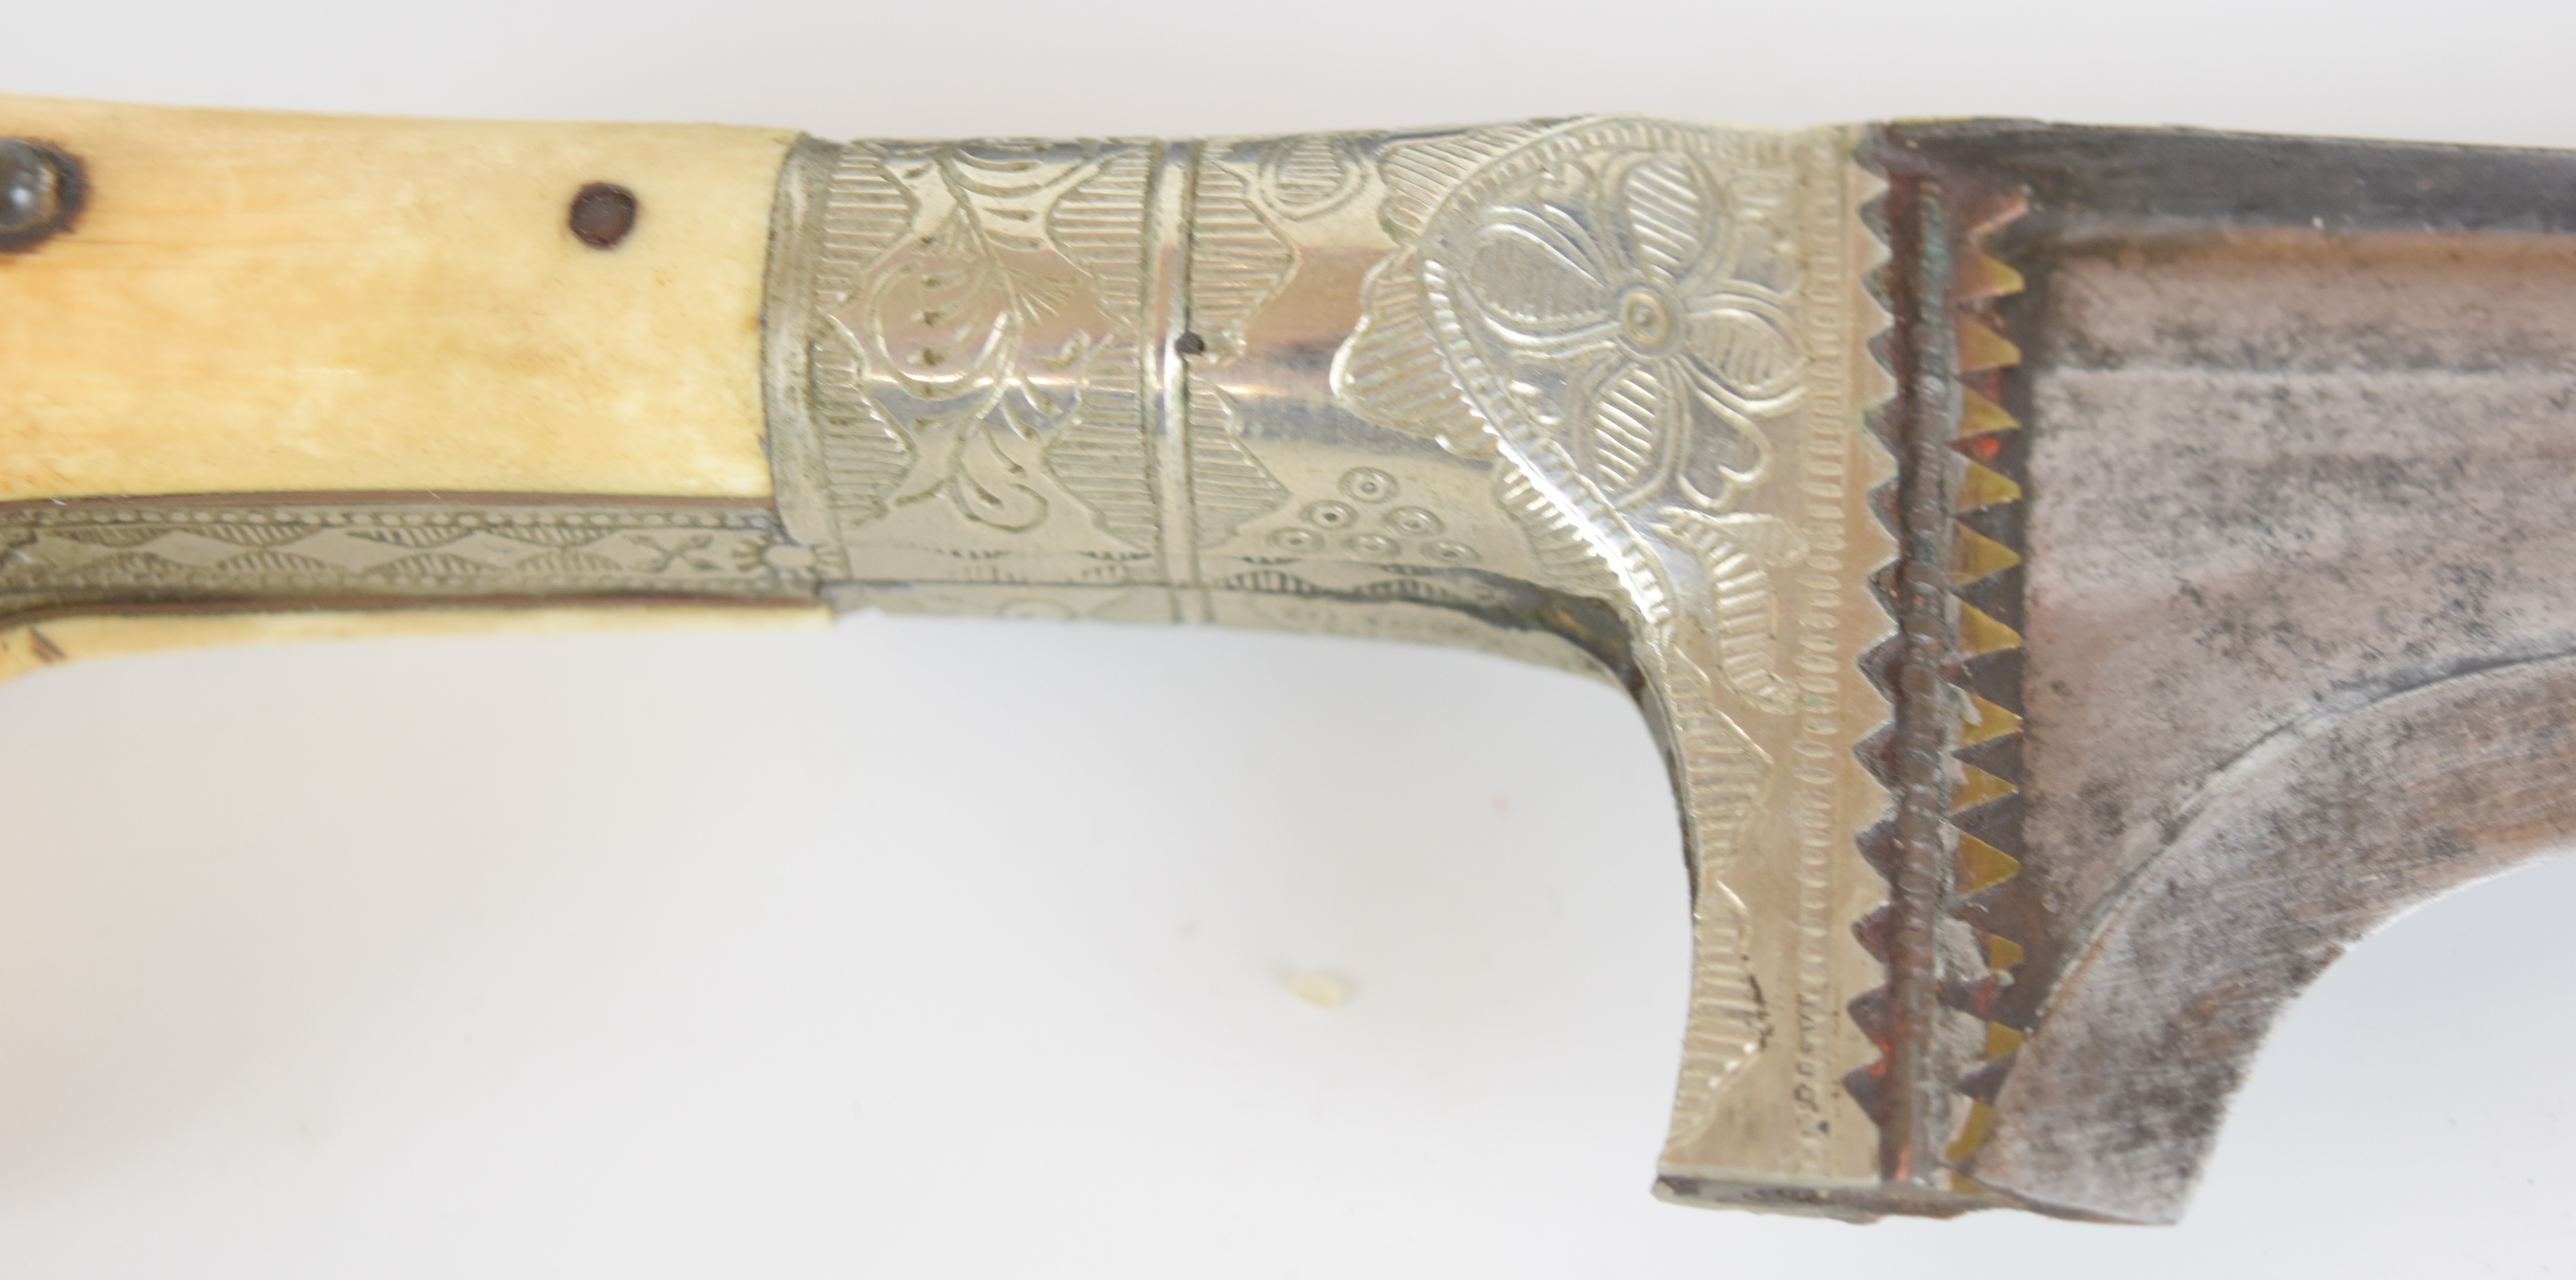 Indo Persian Pesh-Kabz knife or dagger with ivory grips to the curved handle, engraved decoration - Image 3 of 8